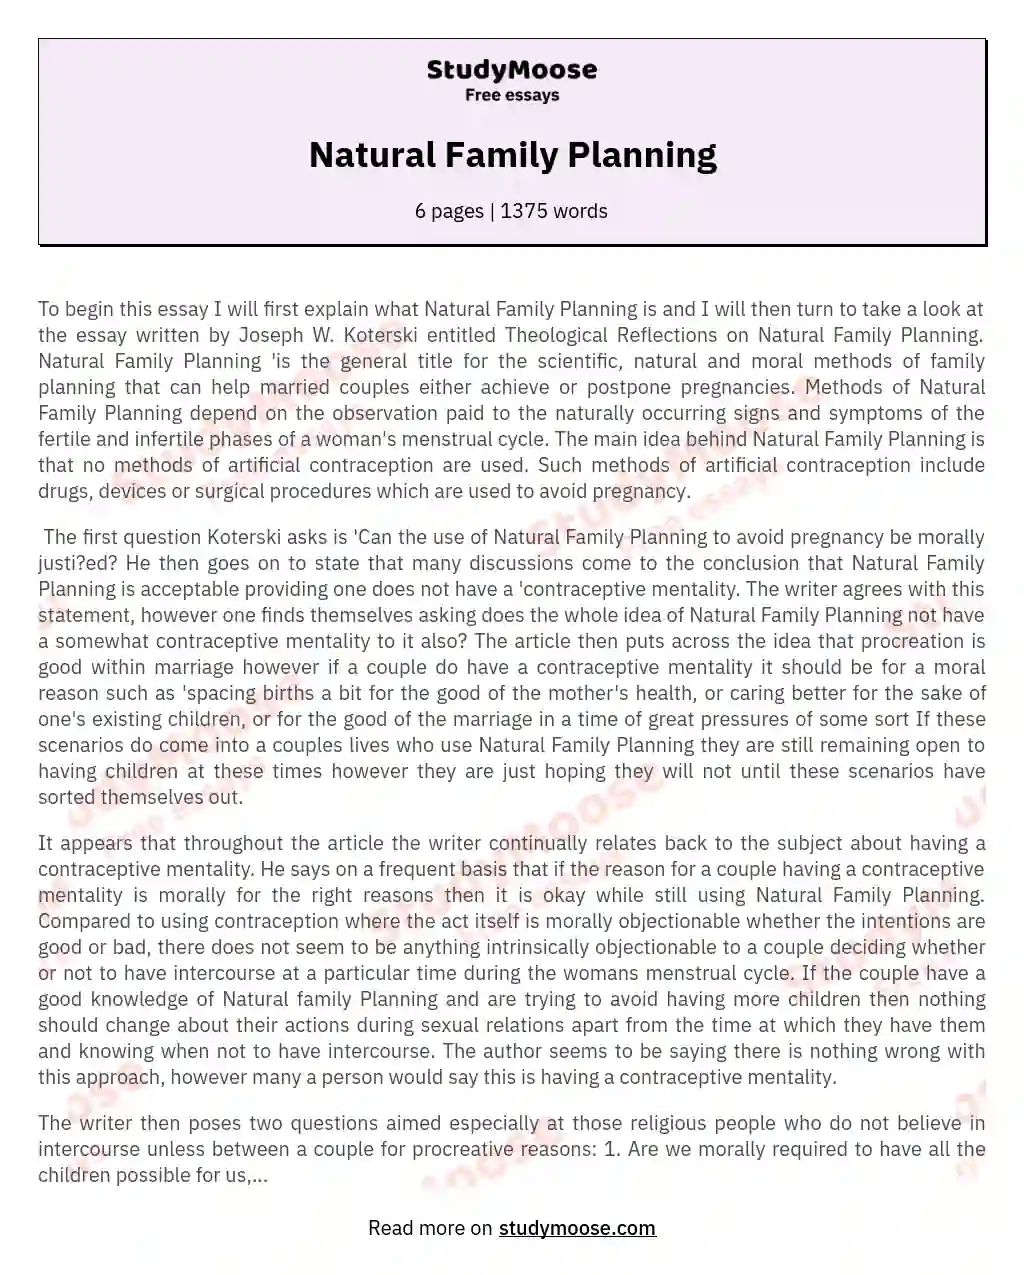 Natural Family Planning essay